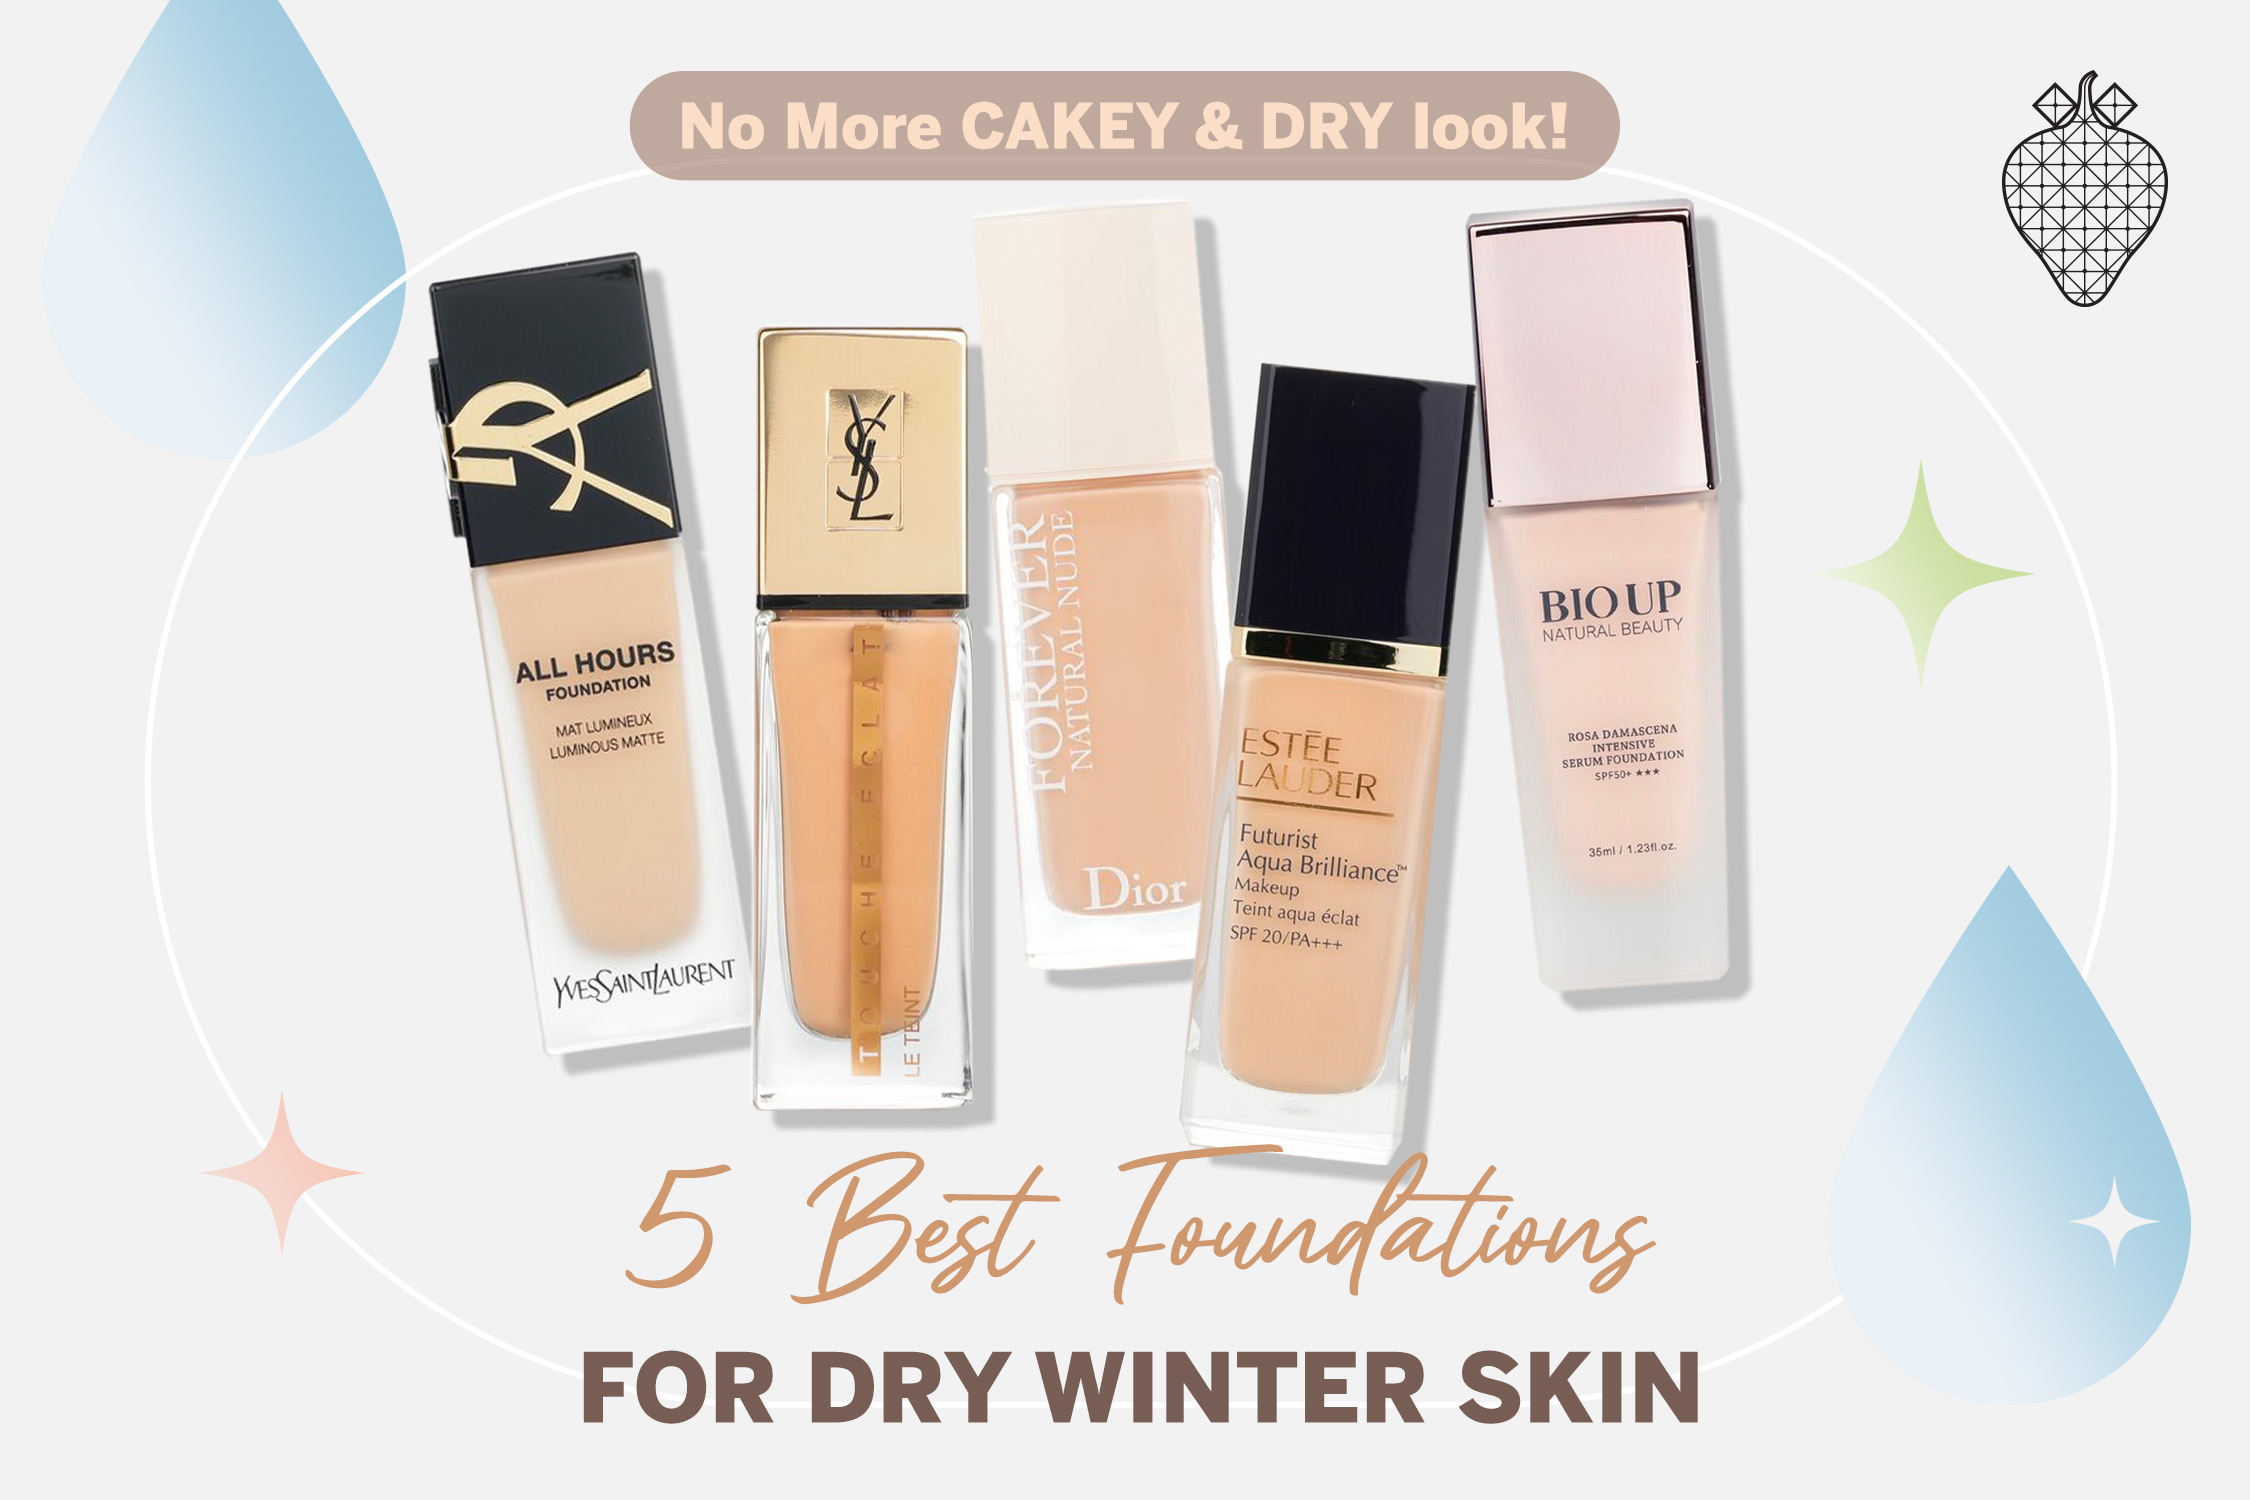 No More dry and flaky makeup! TOP 5 hydrating foundations! article cover